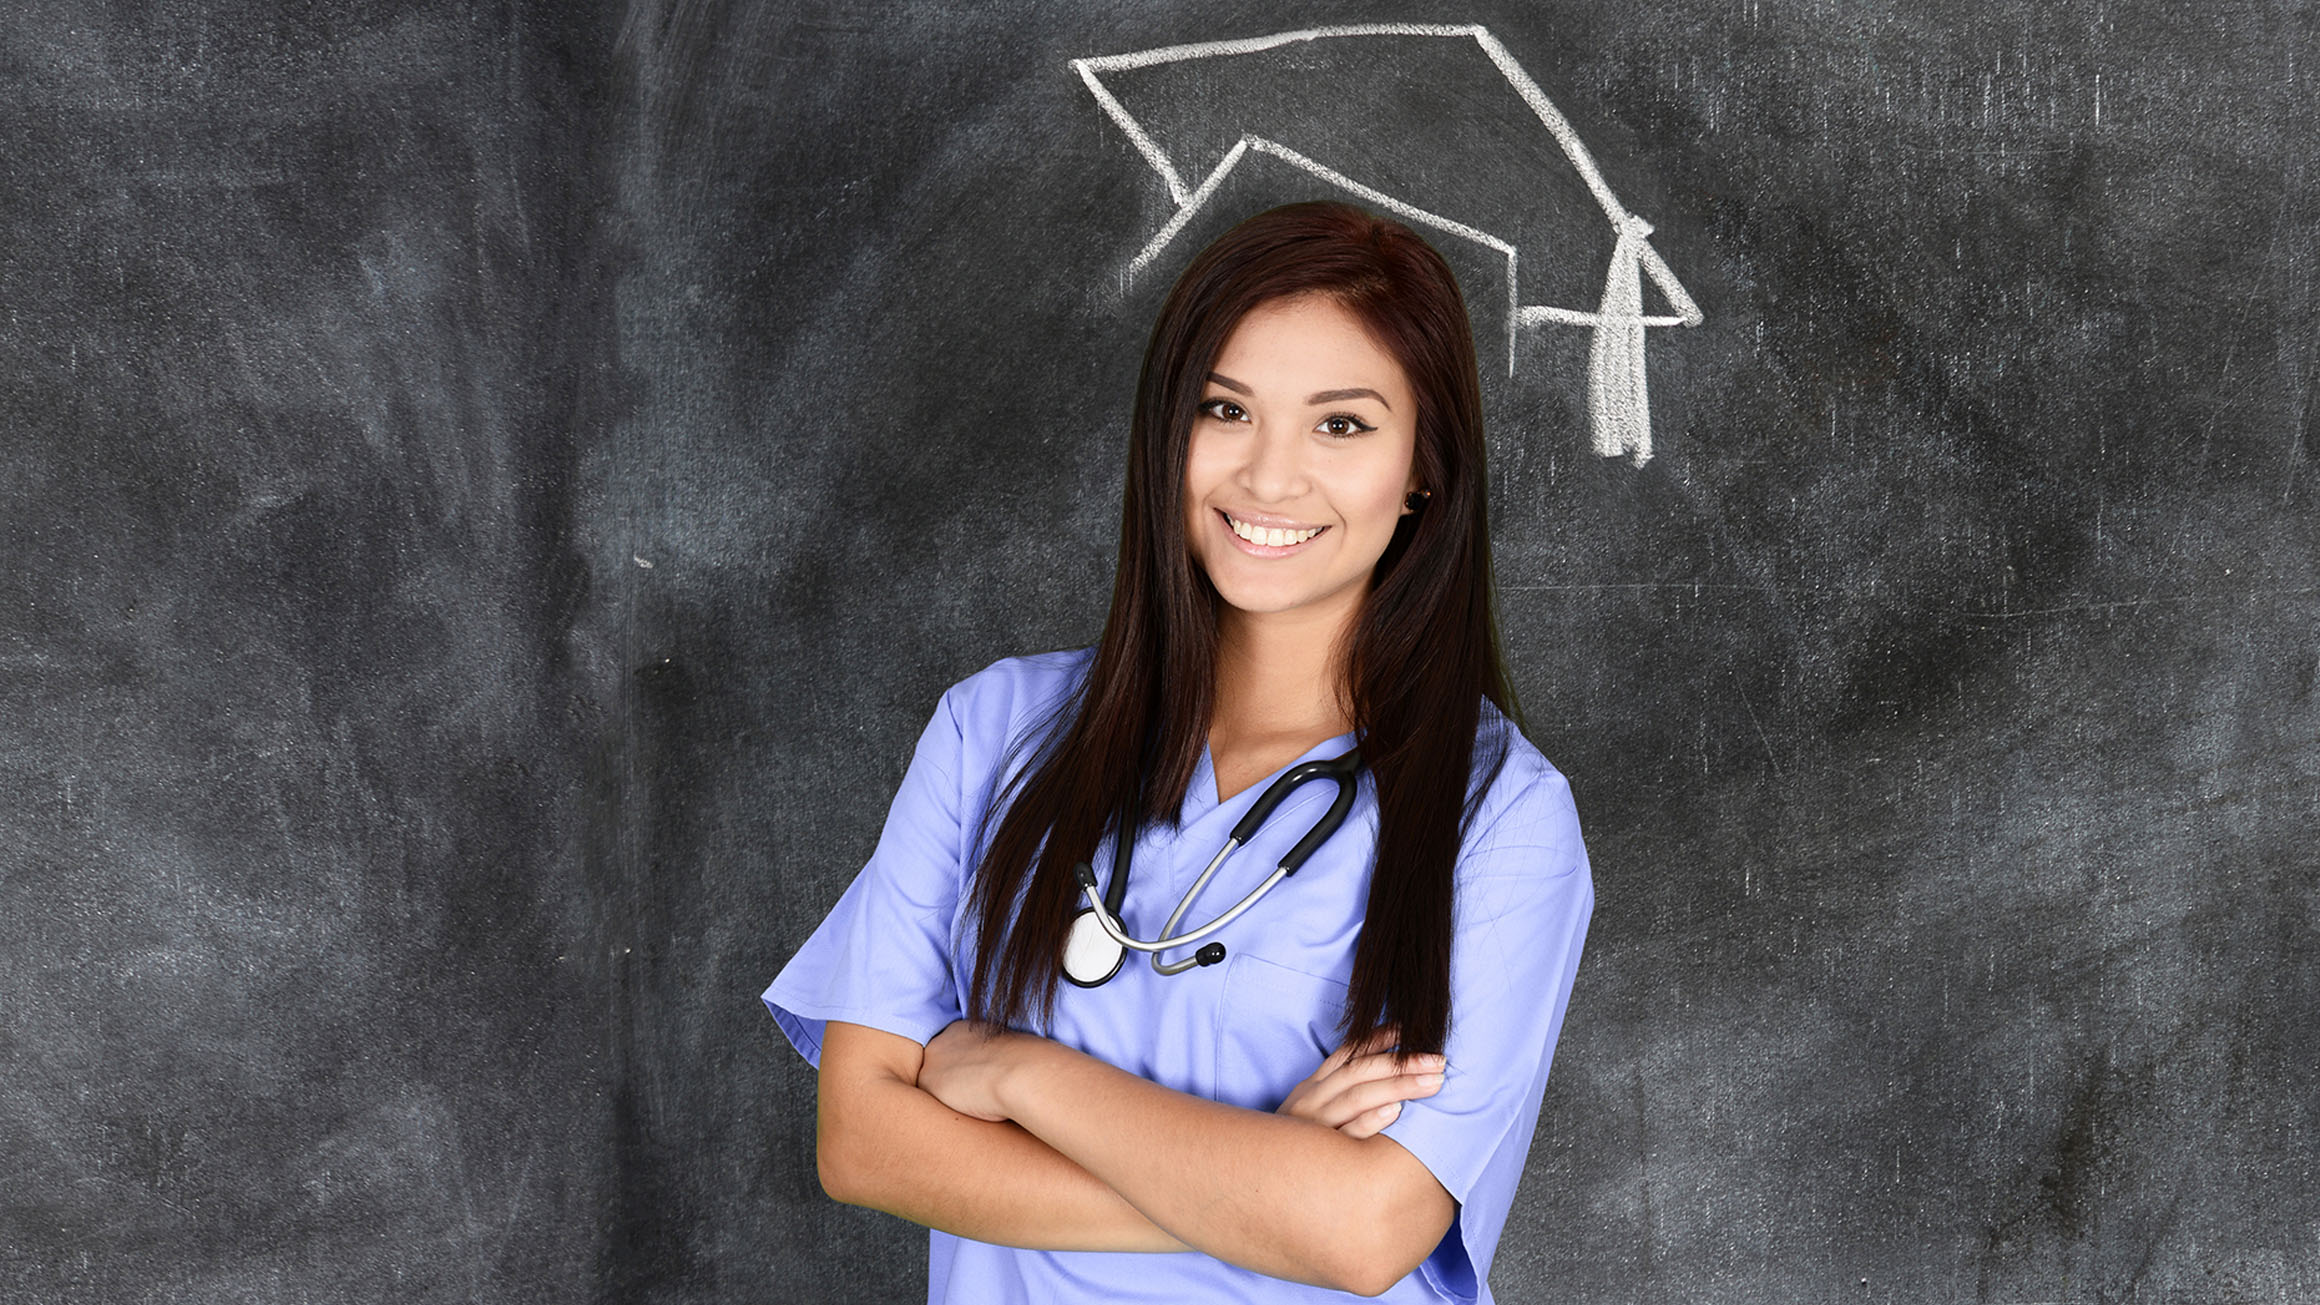  A nurse stands behind a chalkboard with a graduation cap on the chalkboard